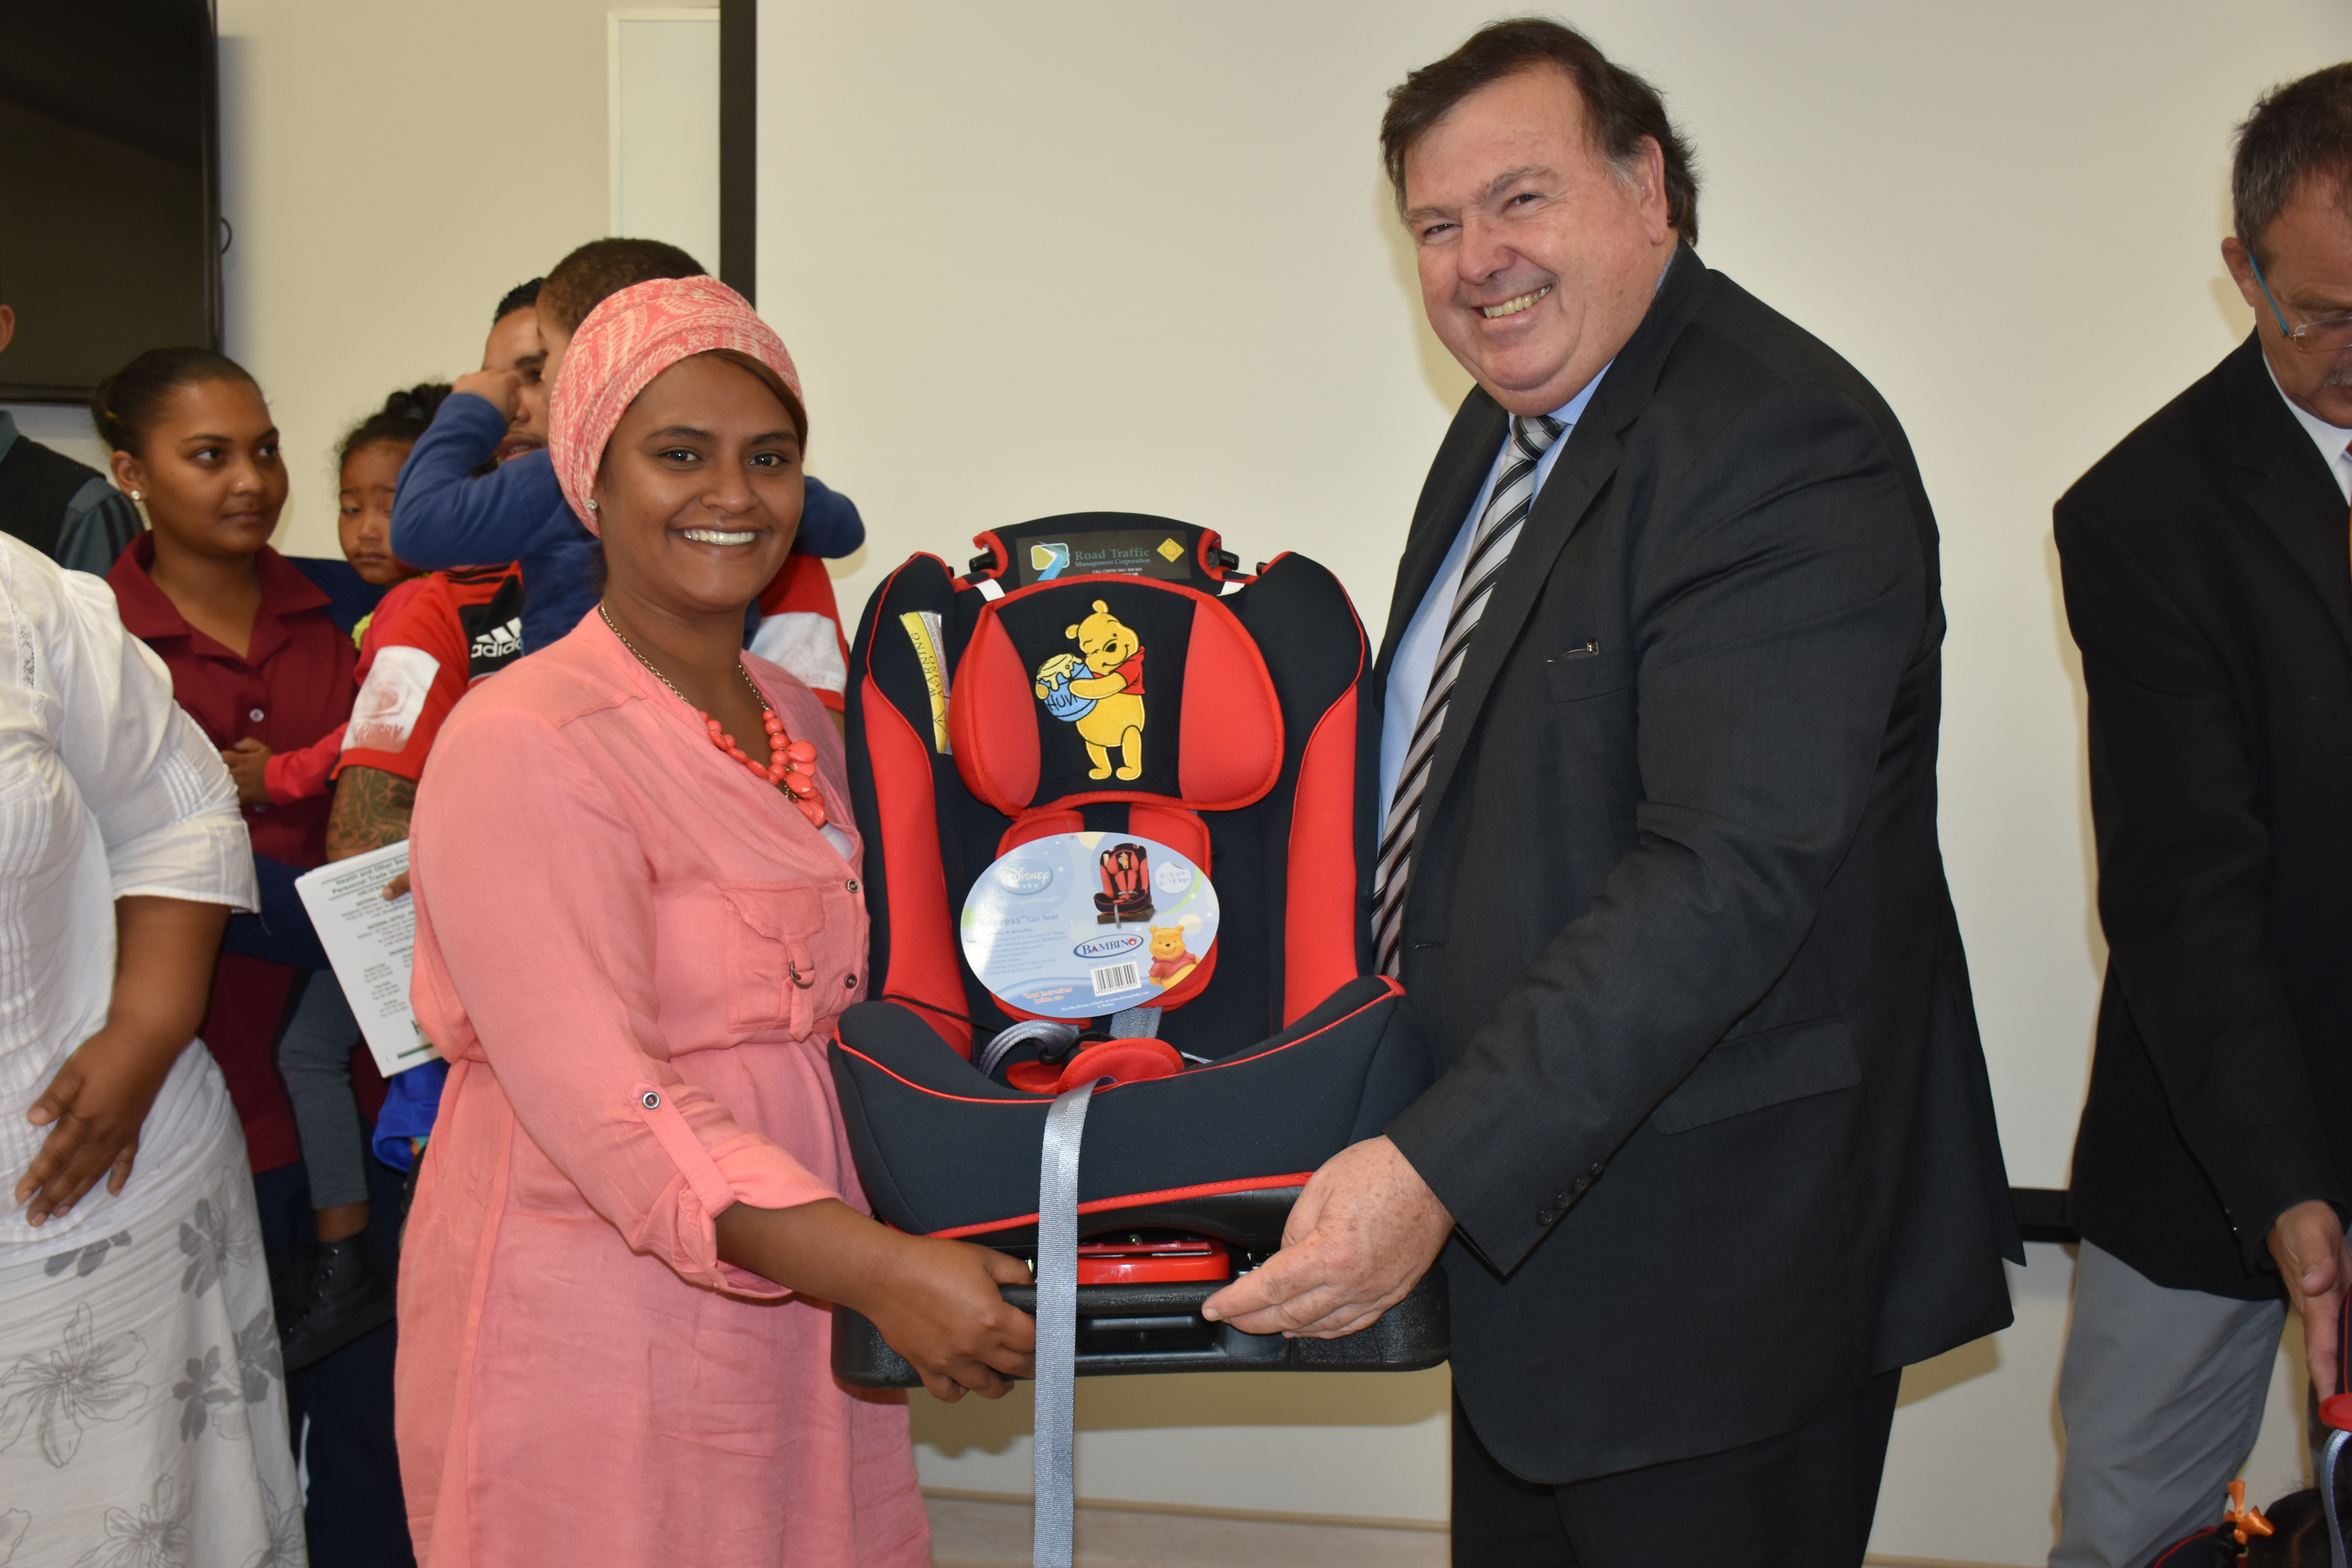 Minister Grant handing over a donated car seat to Ms Fadwa Adams at the event this morning.